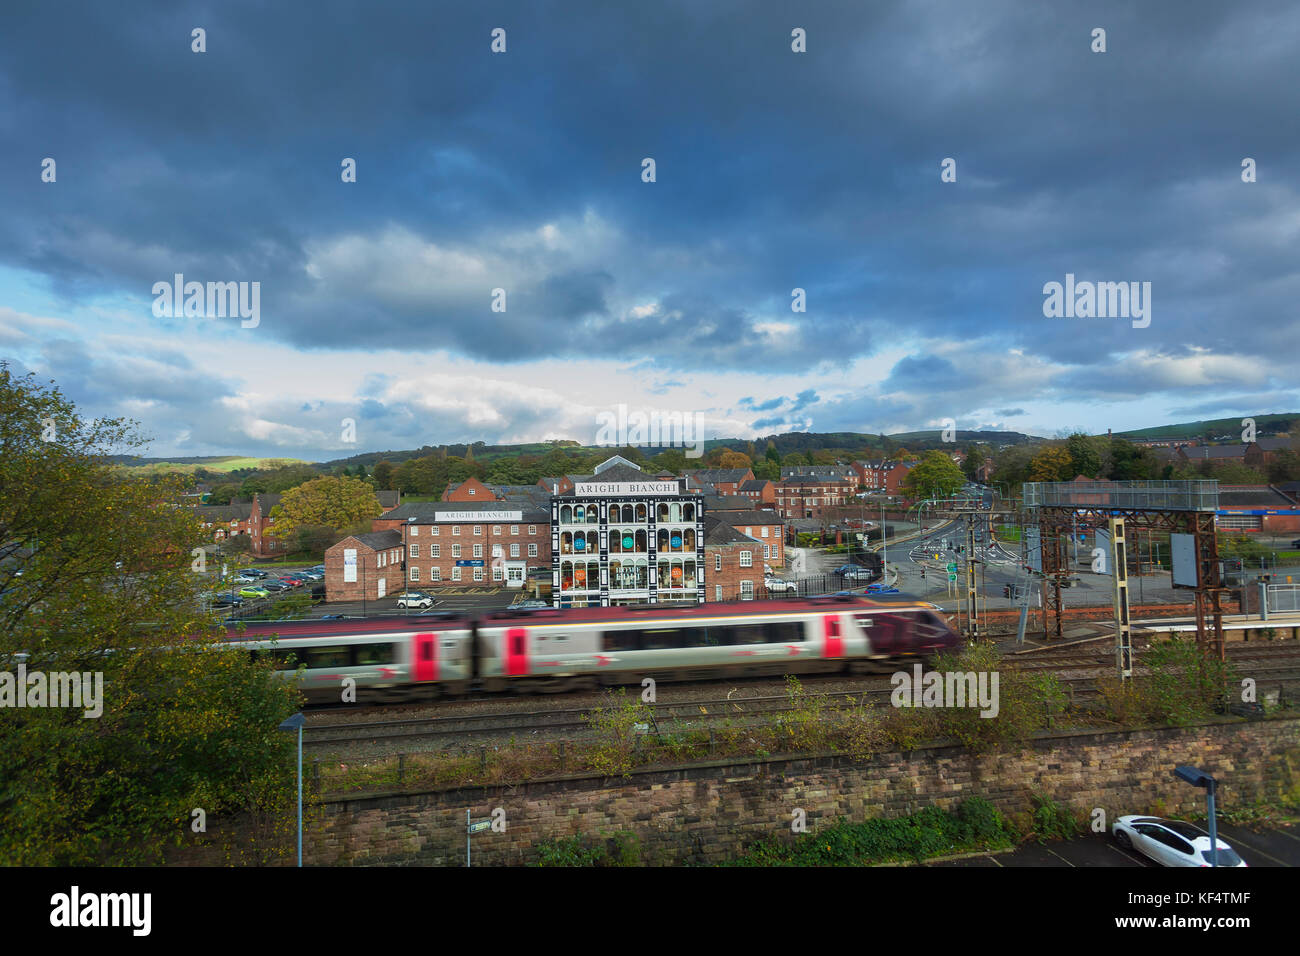 A Cross County Trains Service Arriving at Macclesfield Railway Station Stock Photo